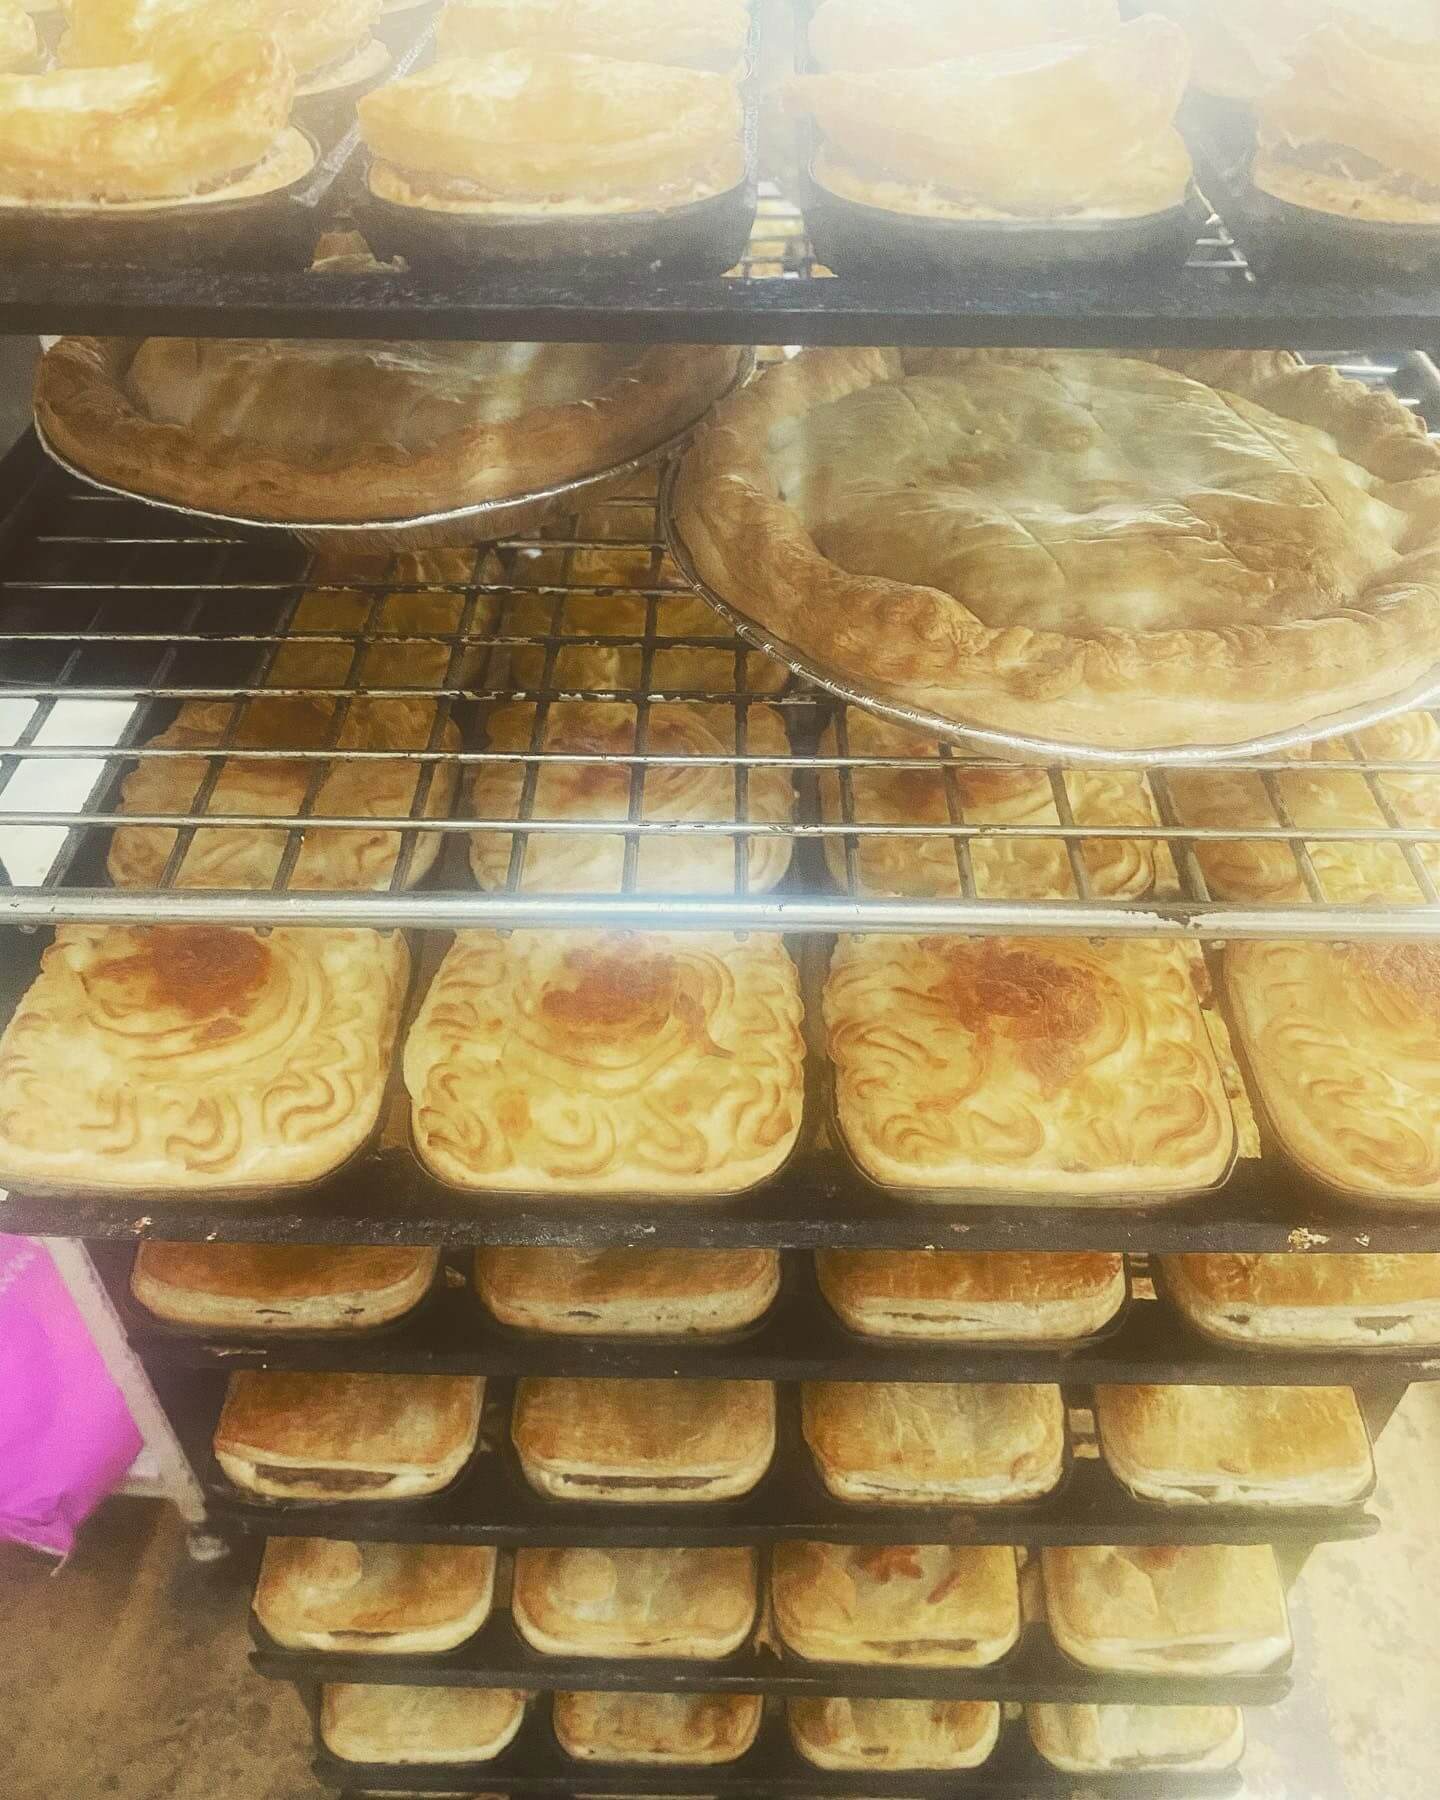 Prominent Bakery for Sale in VIC Regional